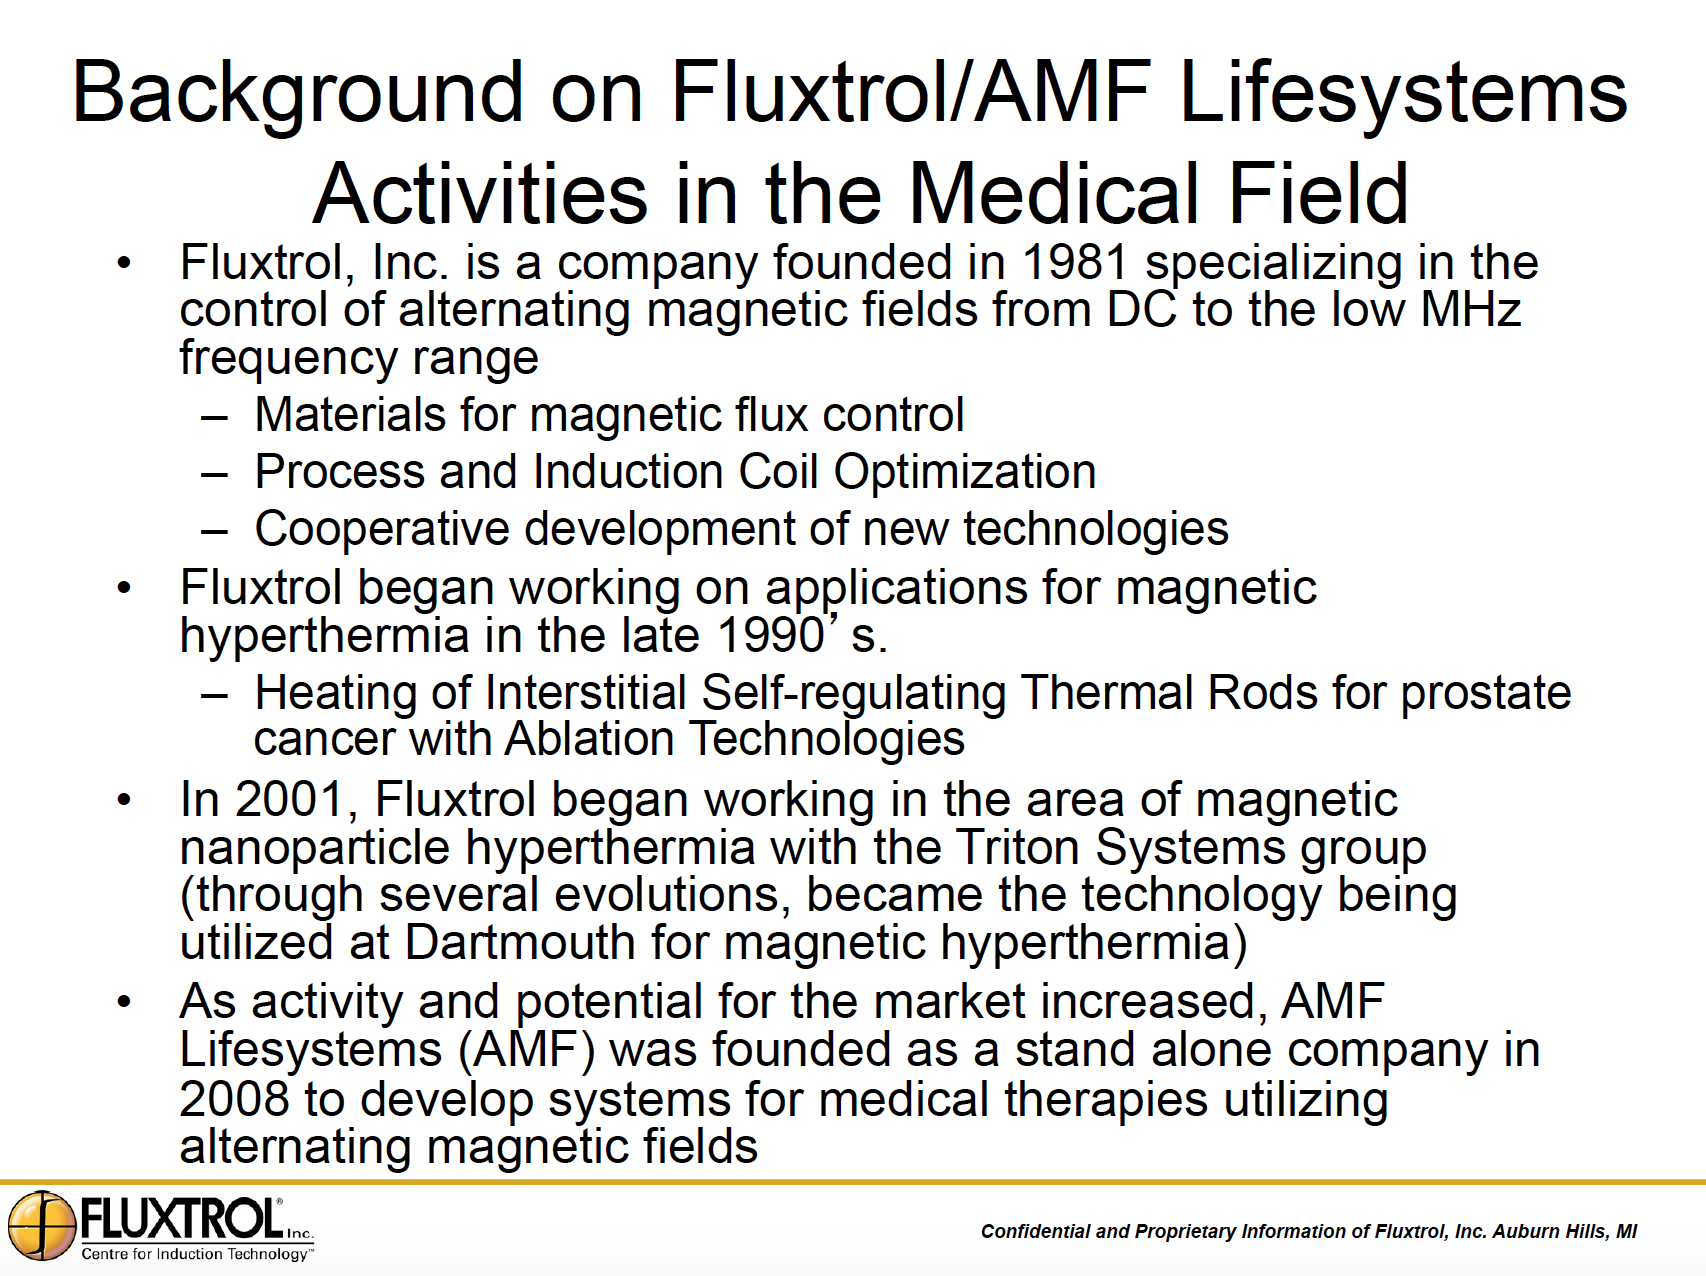 Fluxtrol | Applications of Induction Heating Enabling Advancement in Materials Science Figure 23 - Background on Fluxtrol/AMF Lifesystems Activities in the Medical Field